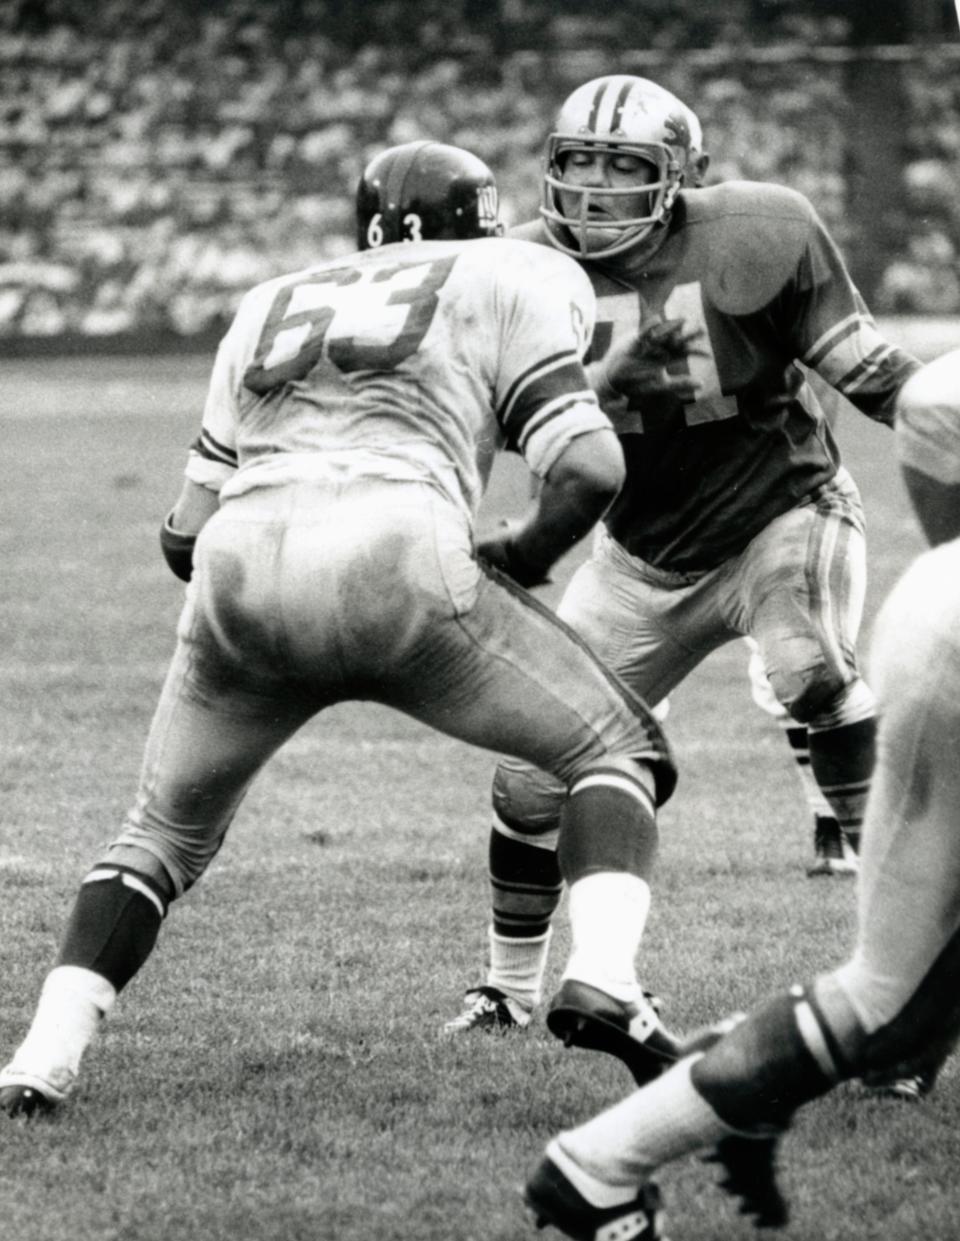 Oct 4, 1964; Detroit, MI, USA; FILE PHOTO; Detroit Lions defensive tackle Alex Karras (71) in action against the New York Giants at Tigers Stadium. The Lions beat the Giants 26-3. Mandatory Credit: Malcolm Emmons-USA TODAY Sports